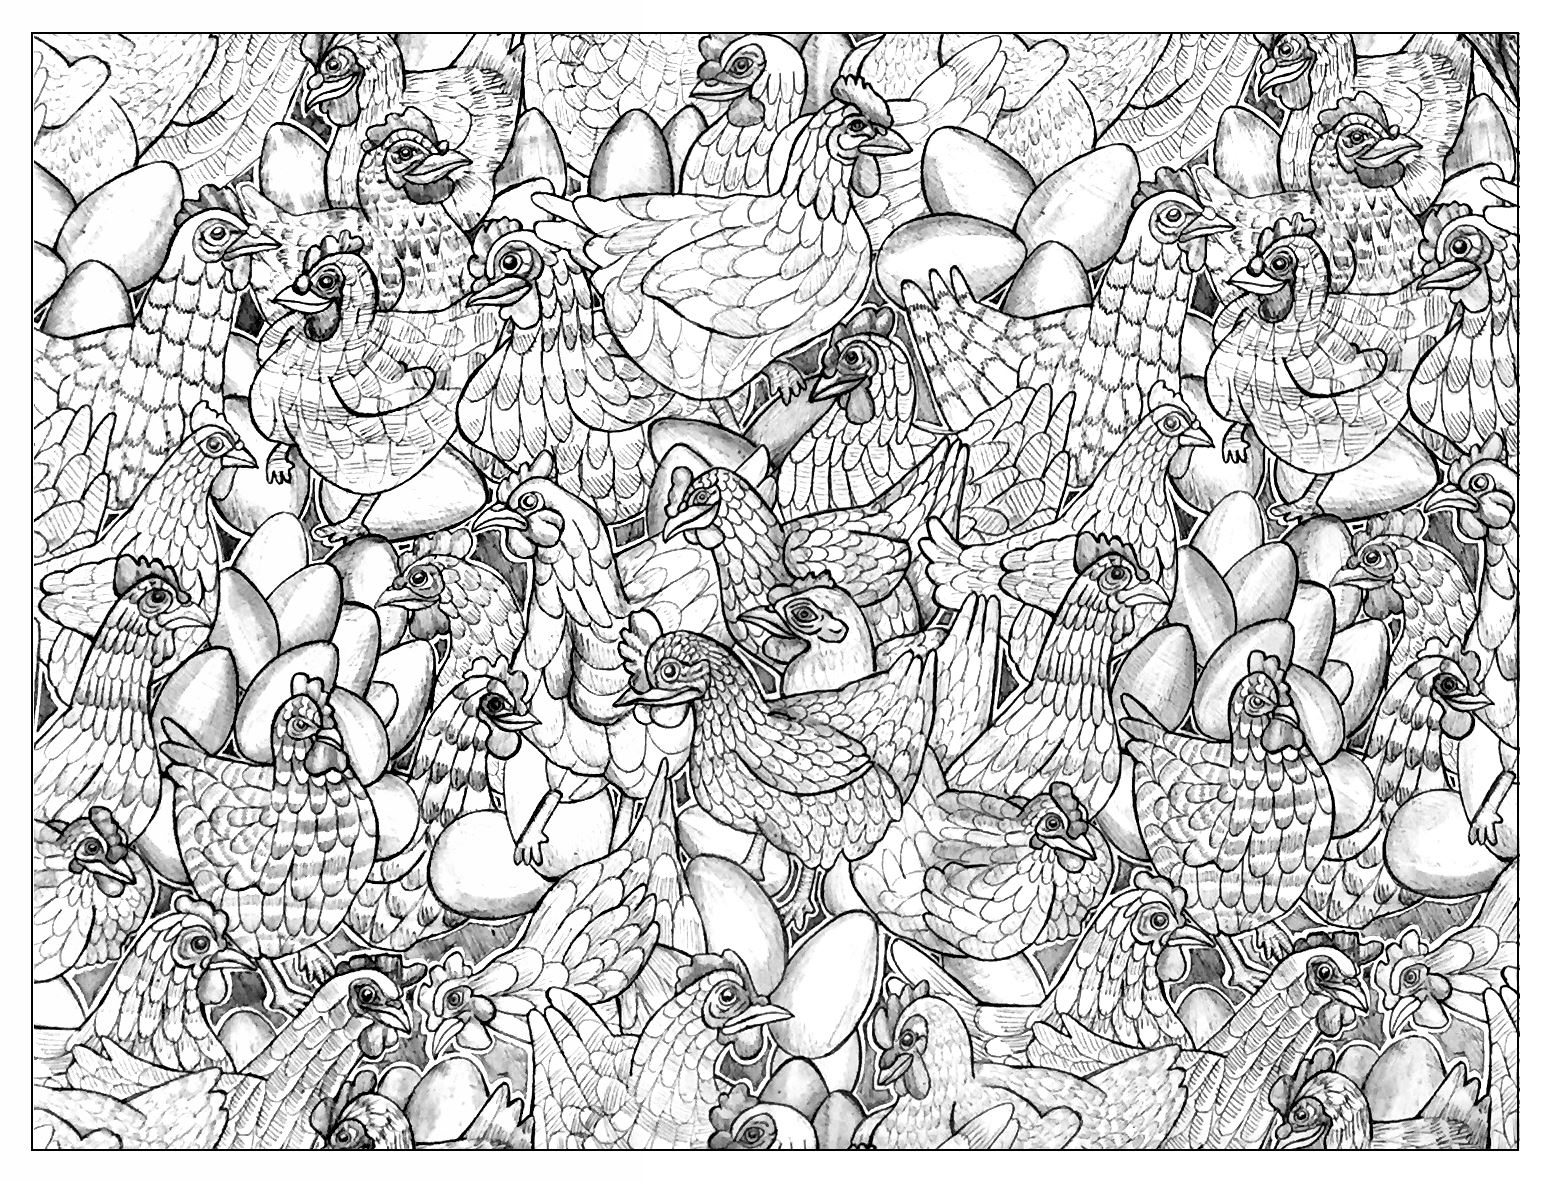 67 Coloring Pages Of A Chicken Pictures